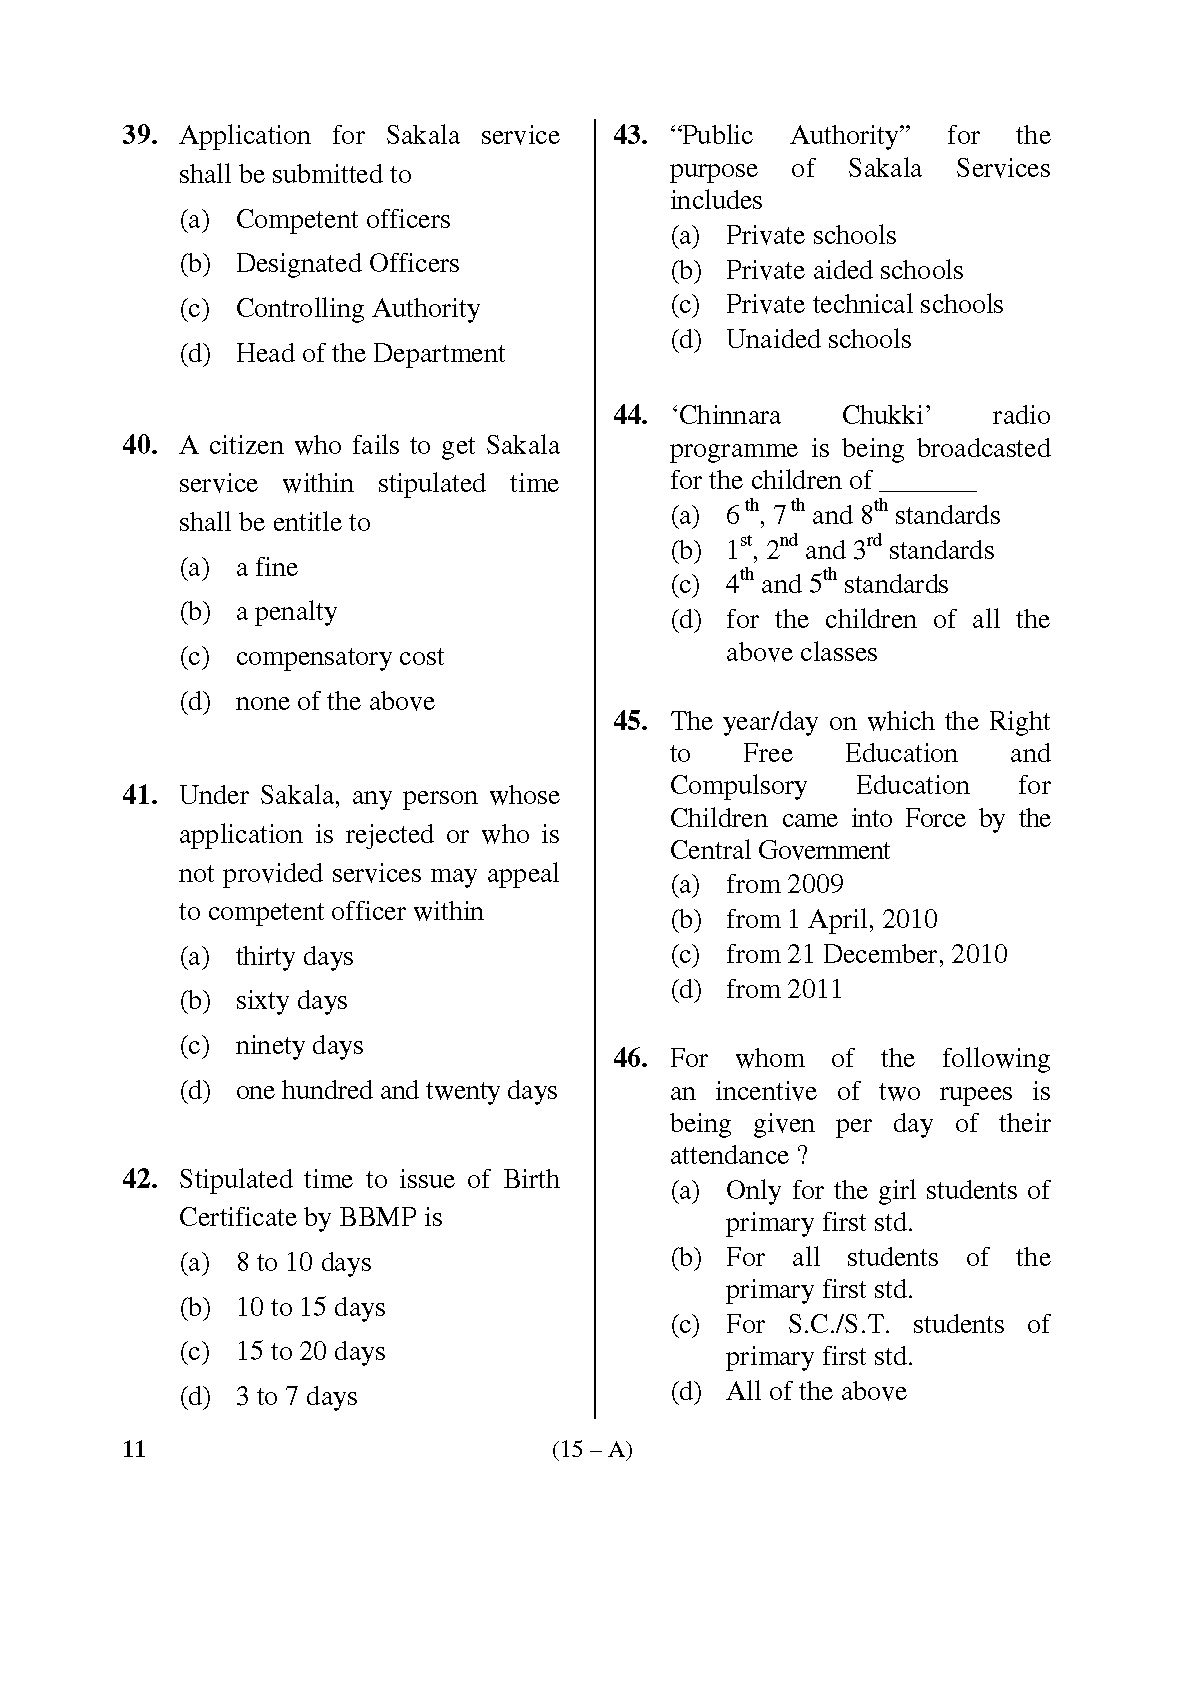 Karnataka PSC First Division Computer Assistants Exam Sample Question Paper 15